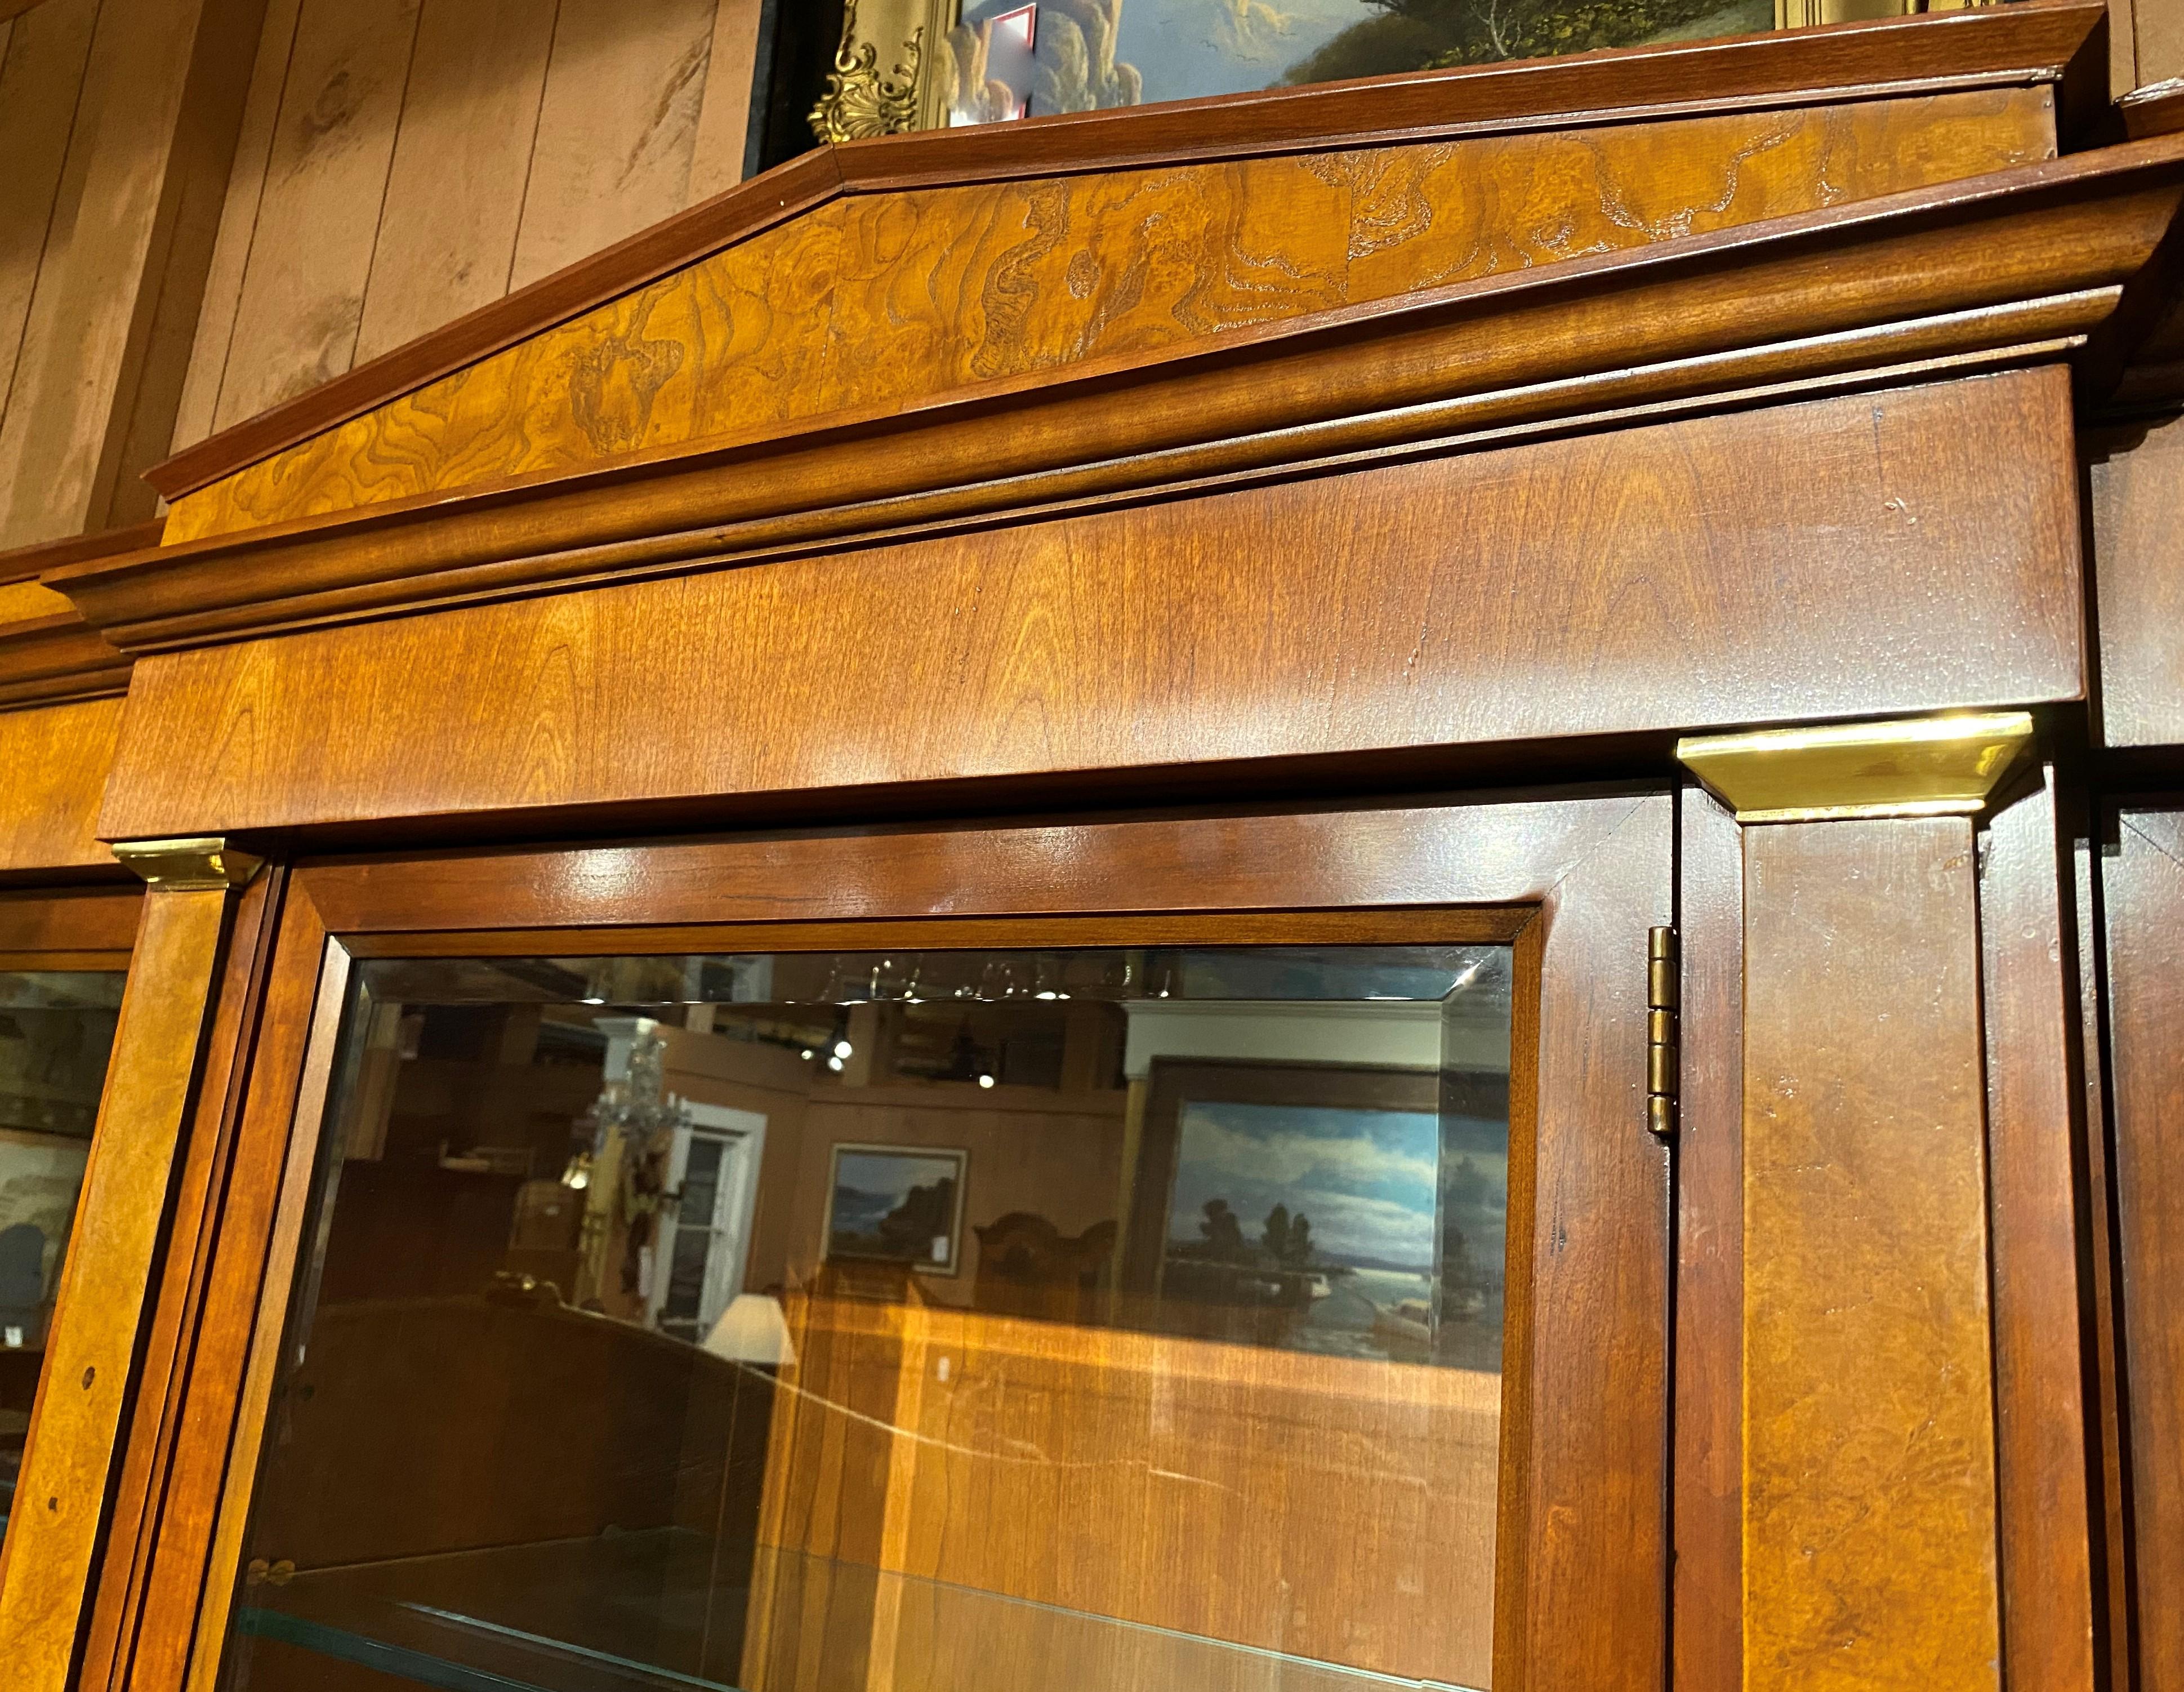 A Fine example of a two part fruitwood breakfront china cabinet, bookcase, or server, its upper case with a burled walnut veneer central pediment and molded cornice surmounting three beveled glass doors, opening to lighted glass shelf compartments,